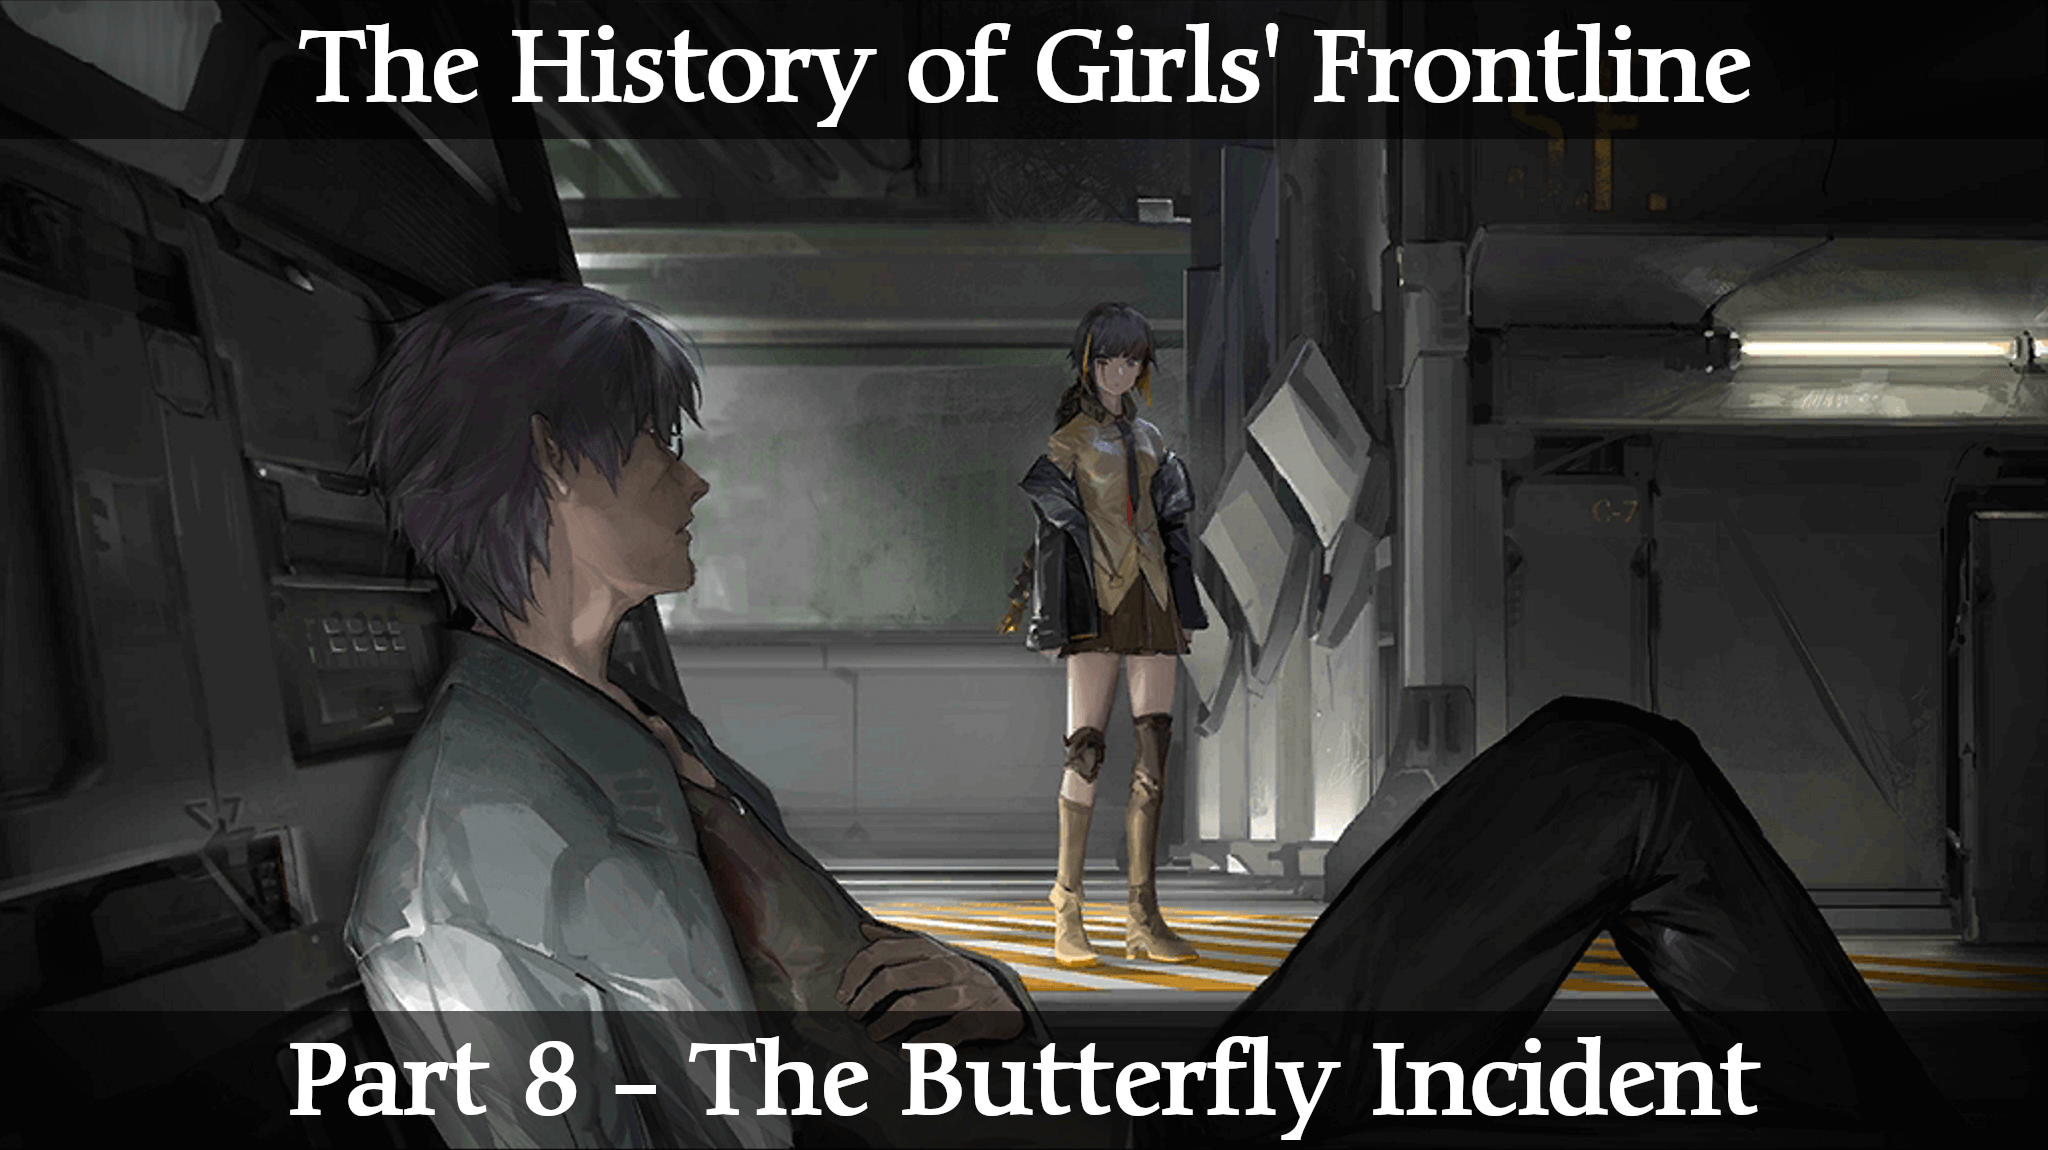 Part 8 of the complete history of Girls Frontline. Part 8 covers the watershed moment that leads to Girls Frontline - the Butterfly Incident in late 2061.